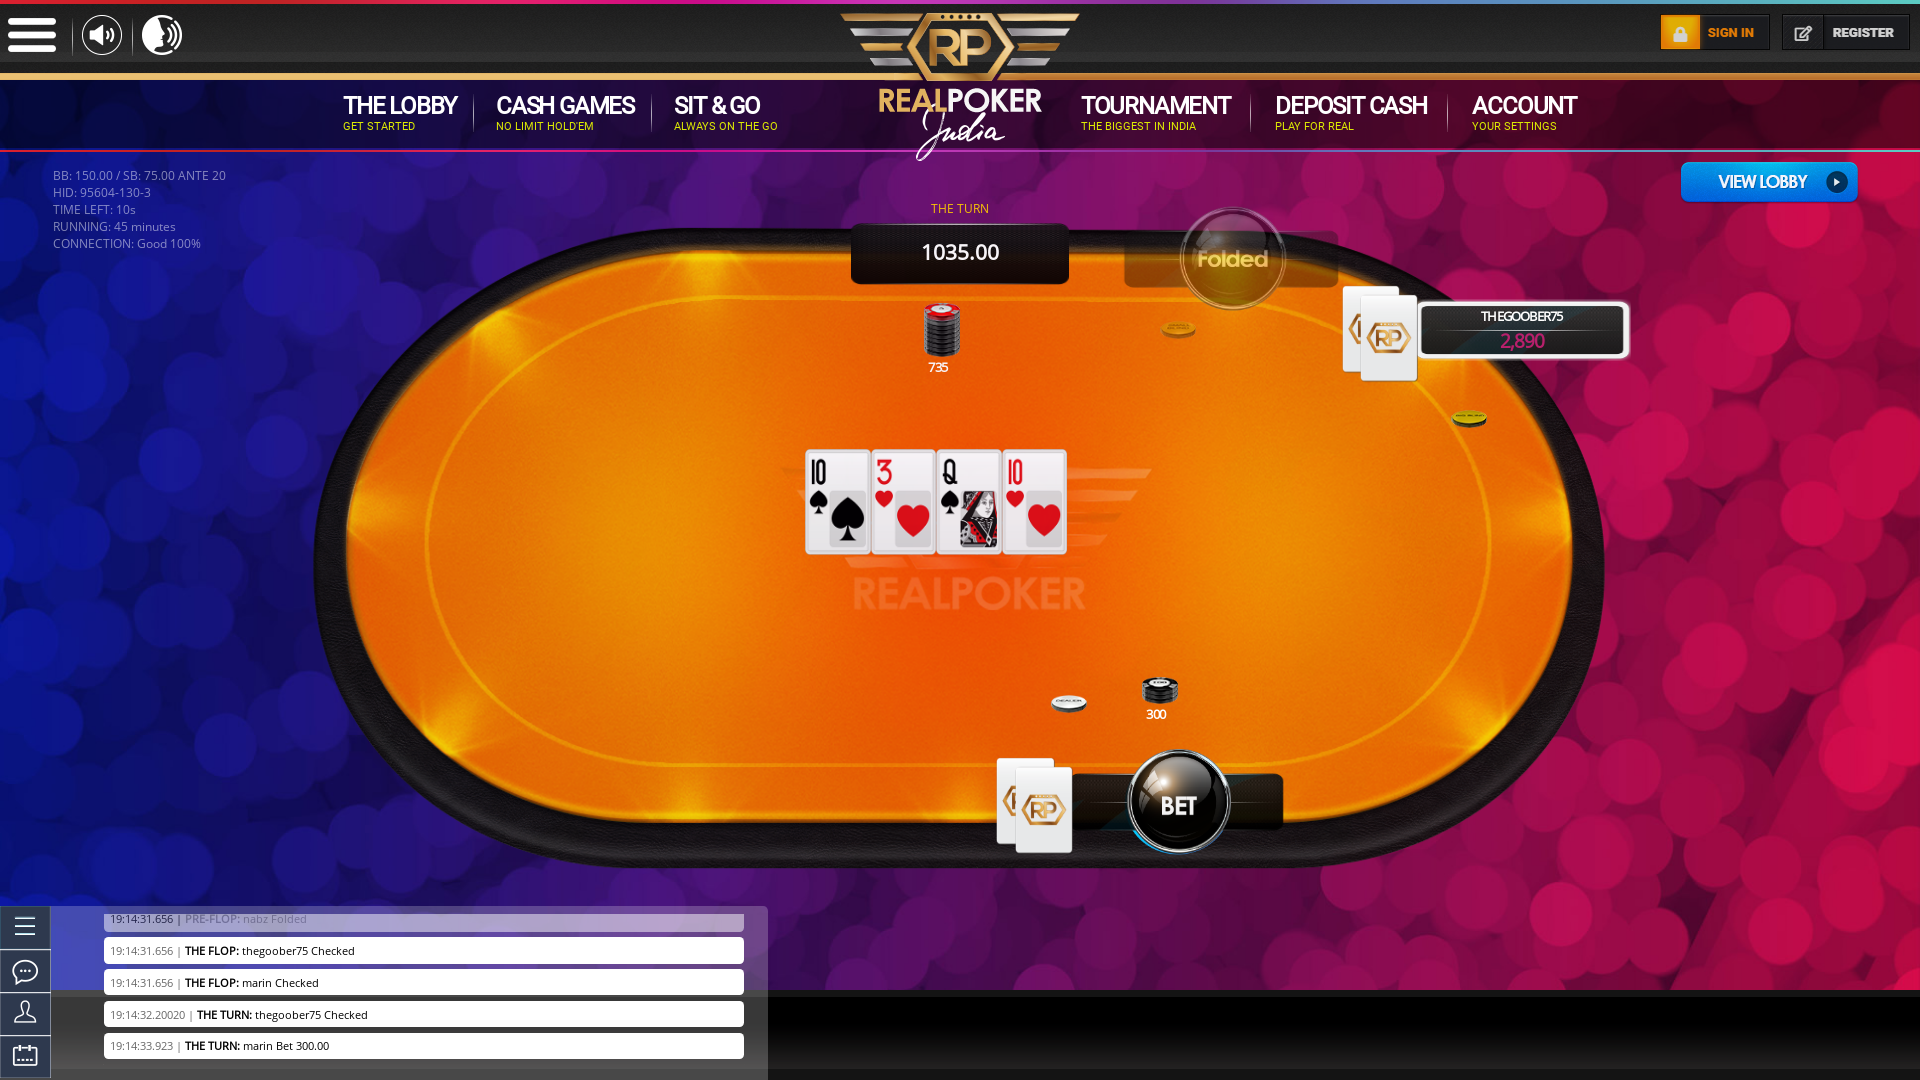 Hyperabad real poker on a 10 player table in the 45th minute